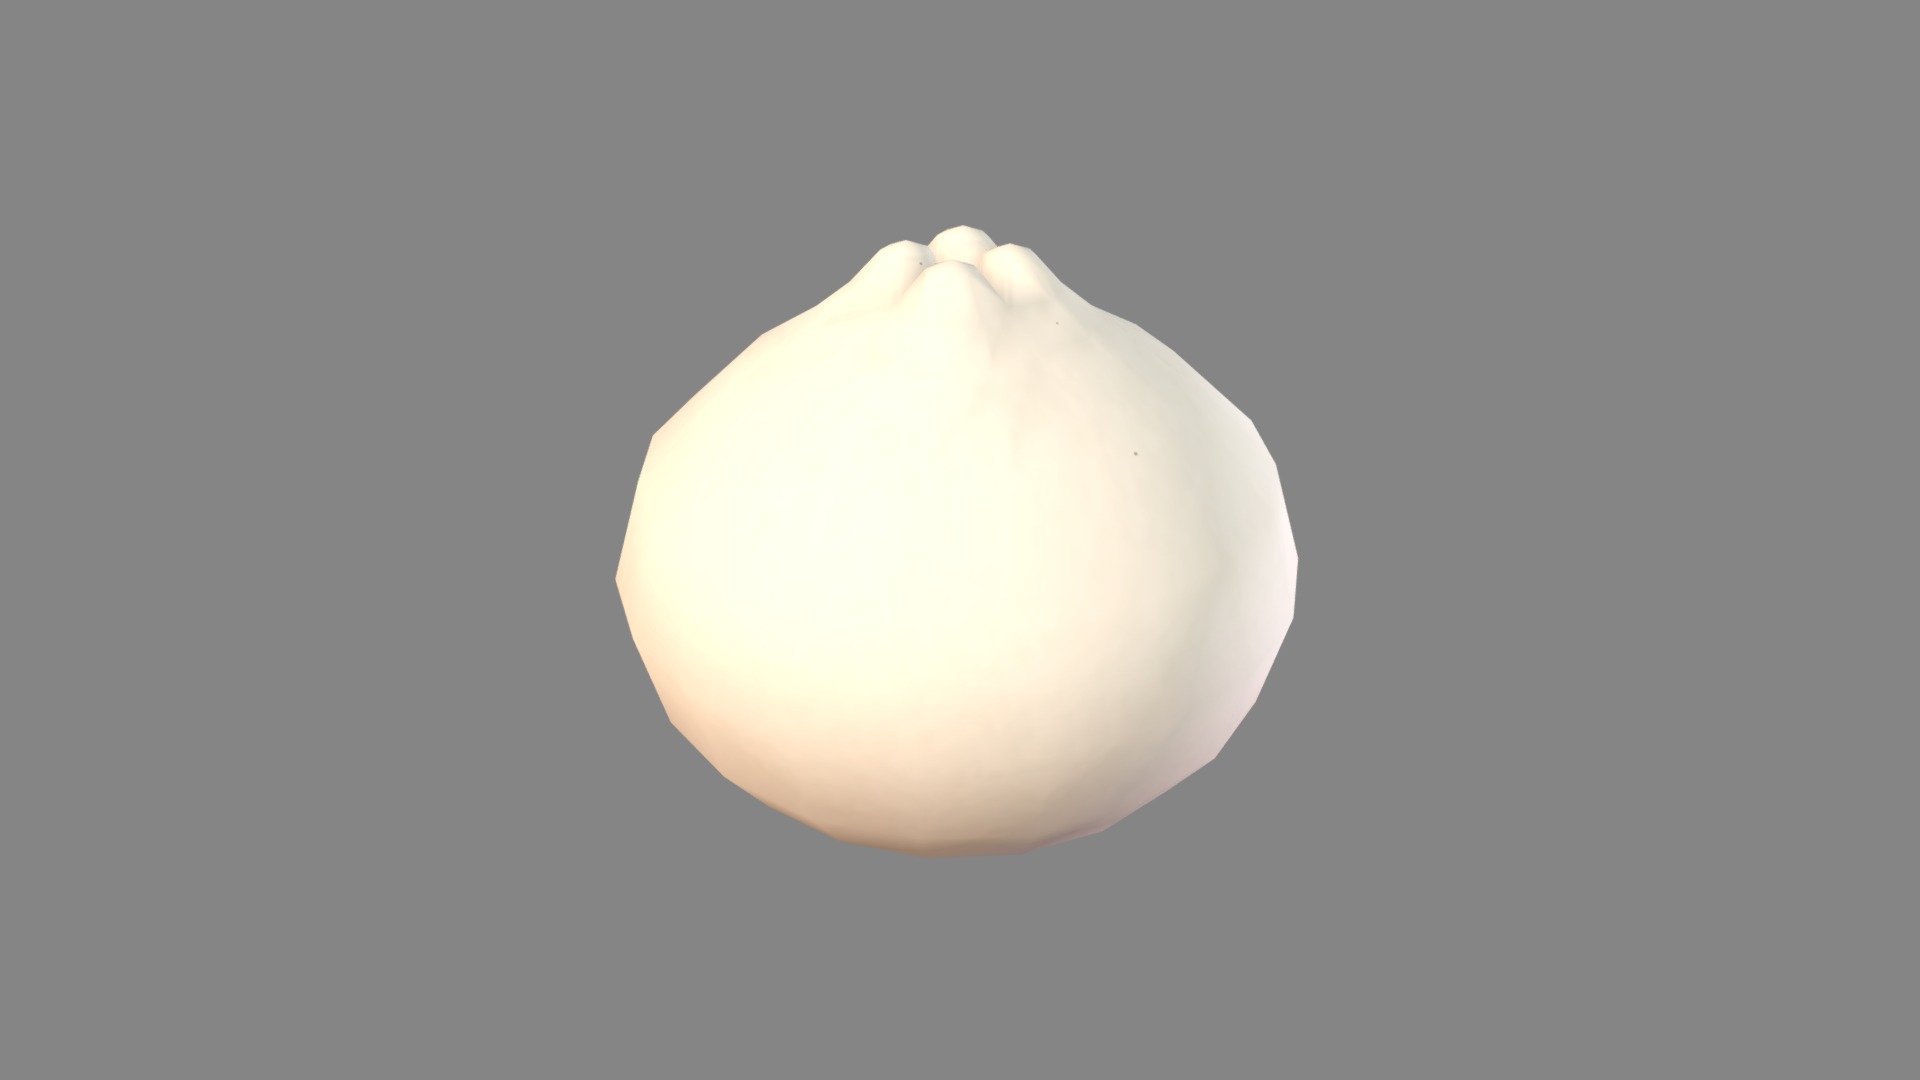 3D model Steamed Buns - This is a 3D model of the Steamed Buns. The 3D model is about a white egg on a grey background.